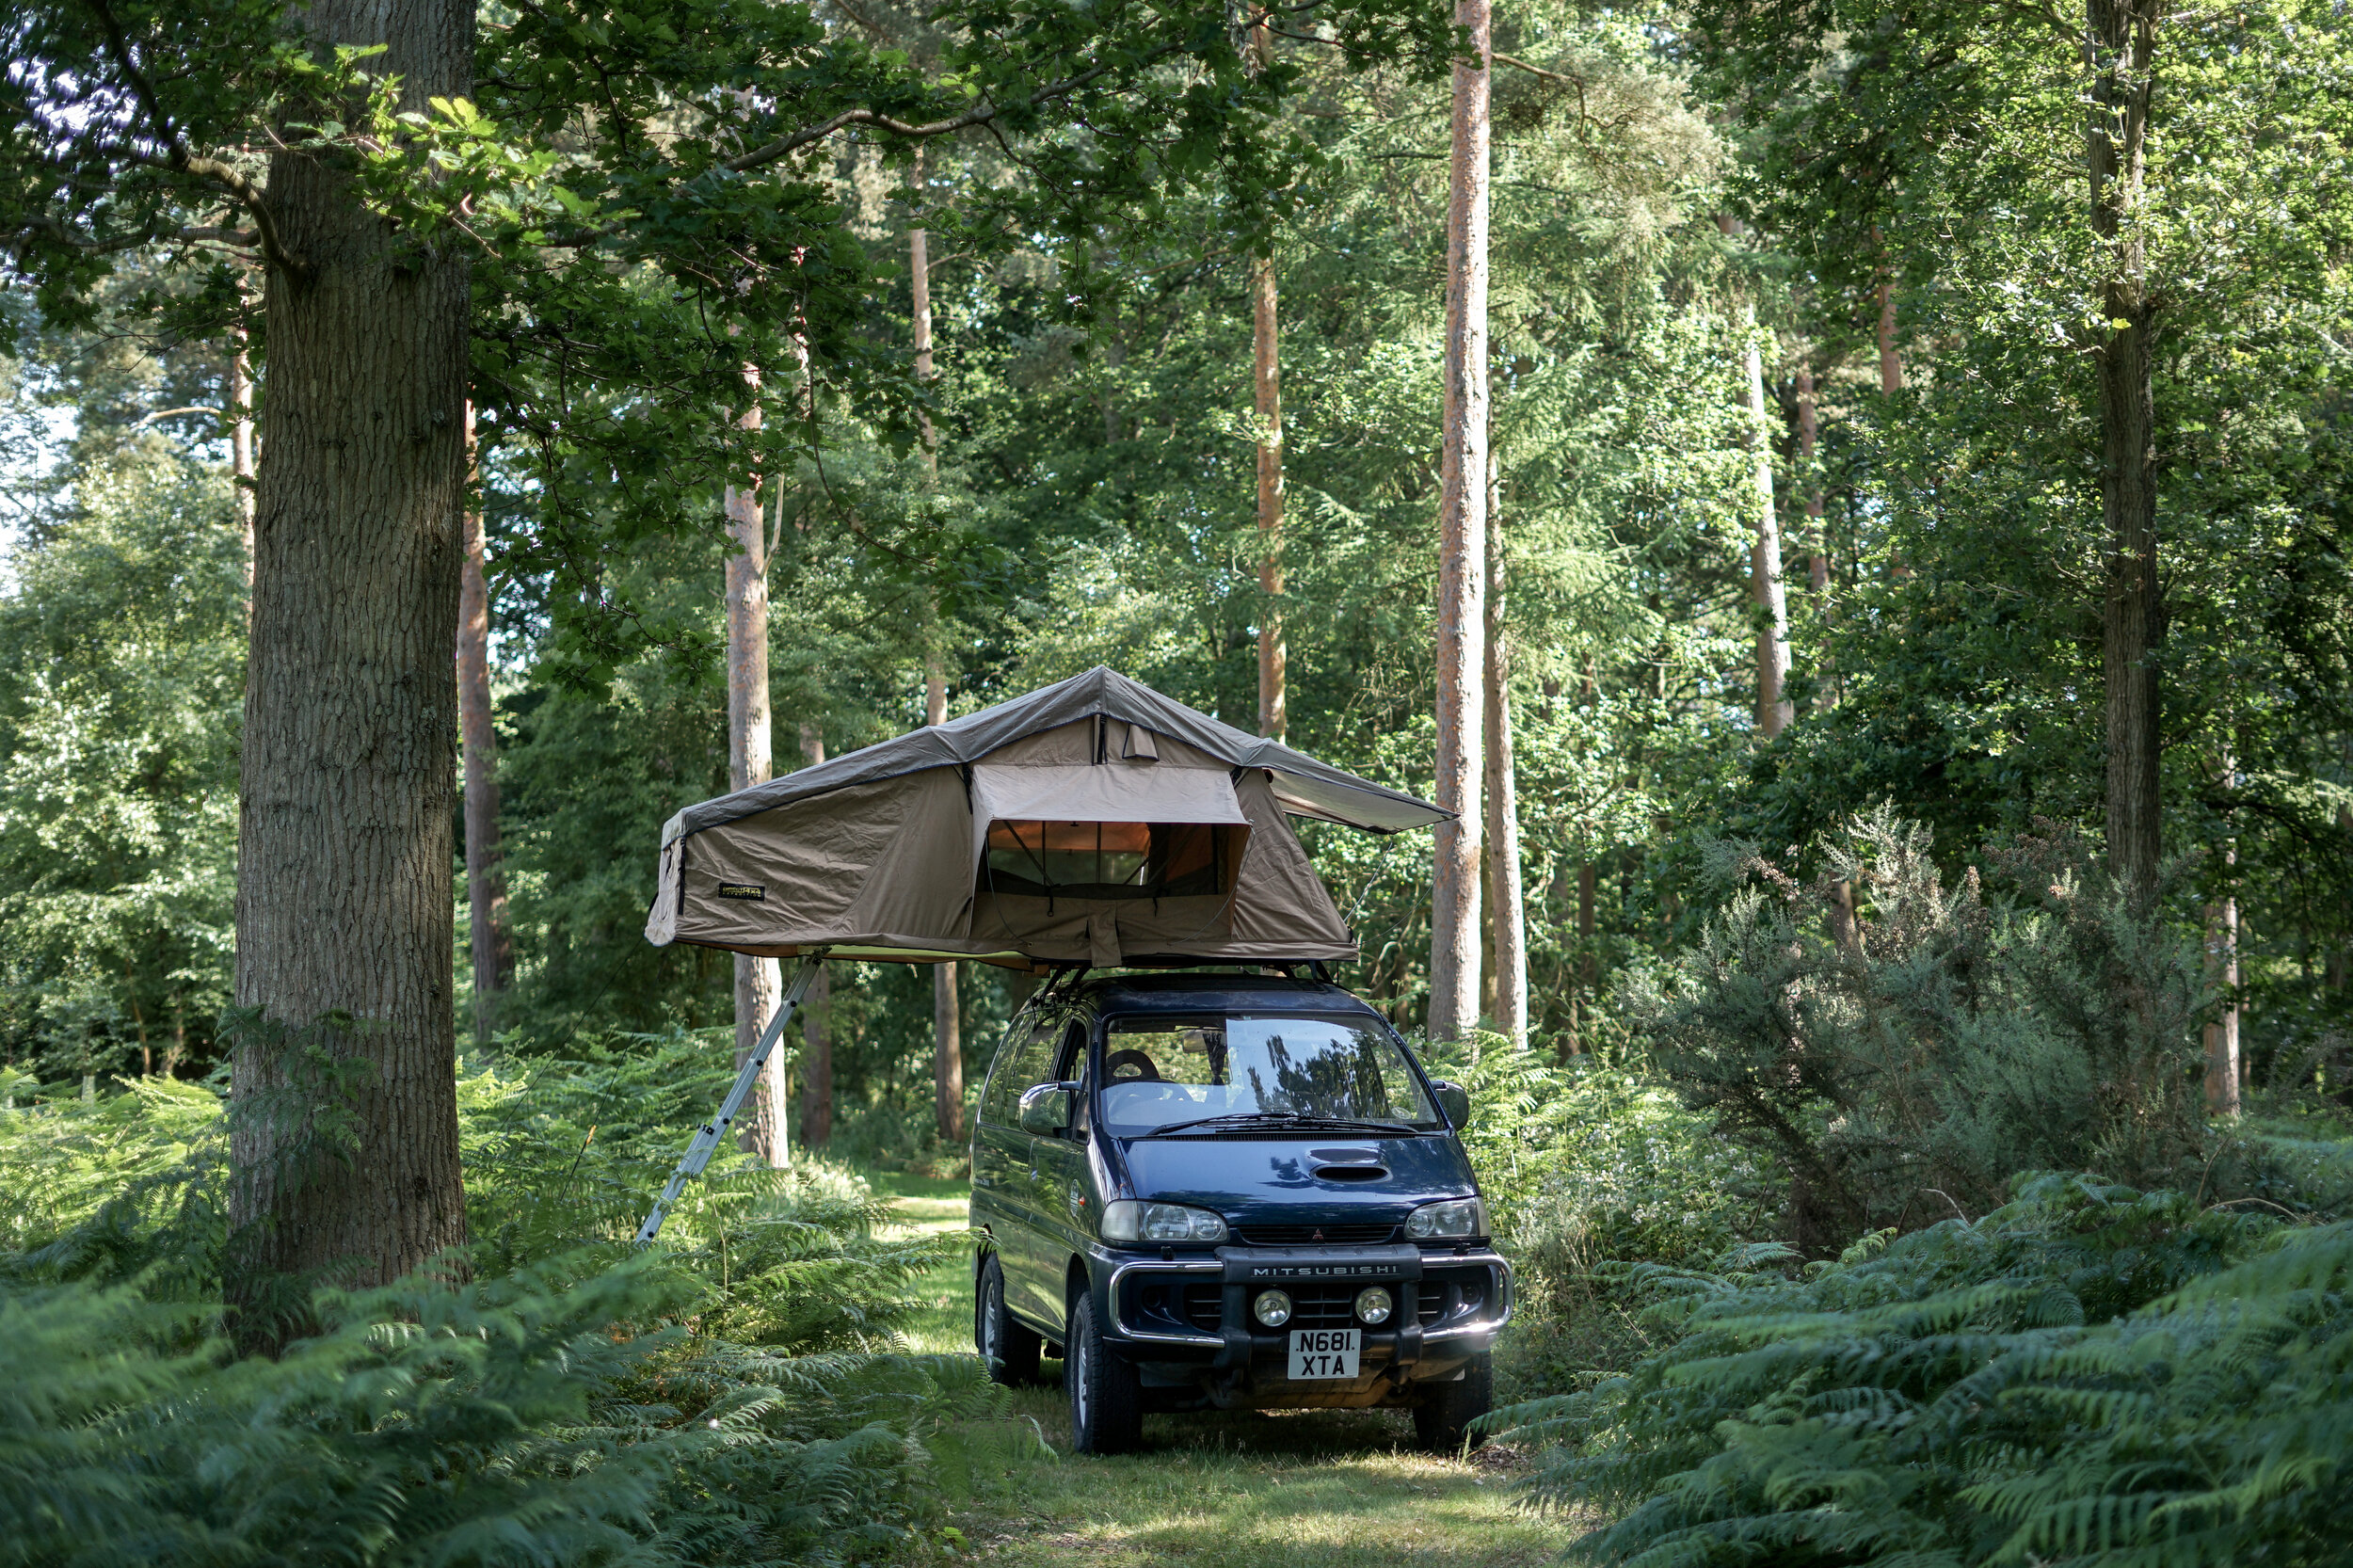 Testing the rooftop tent in the woods